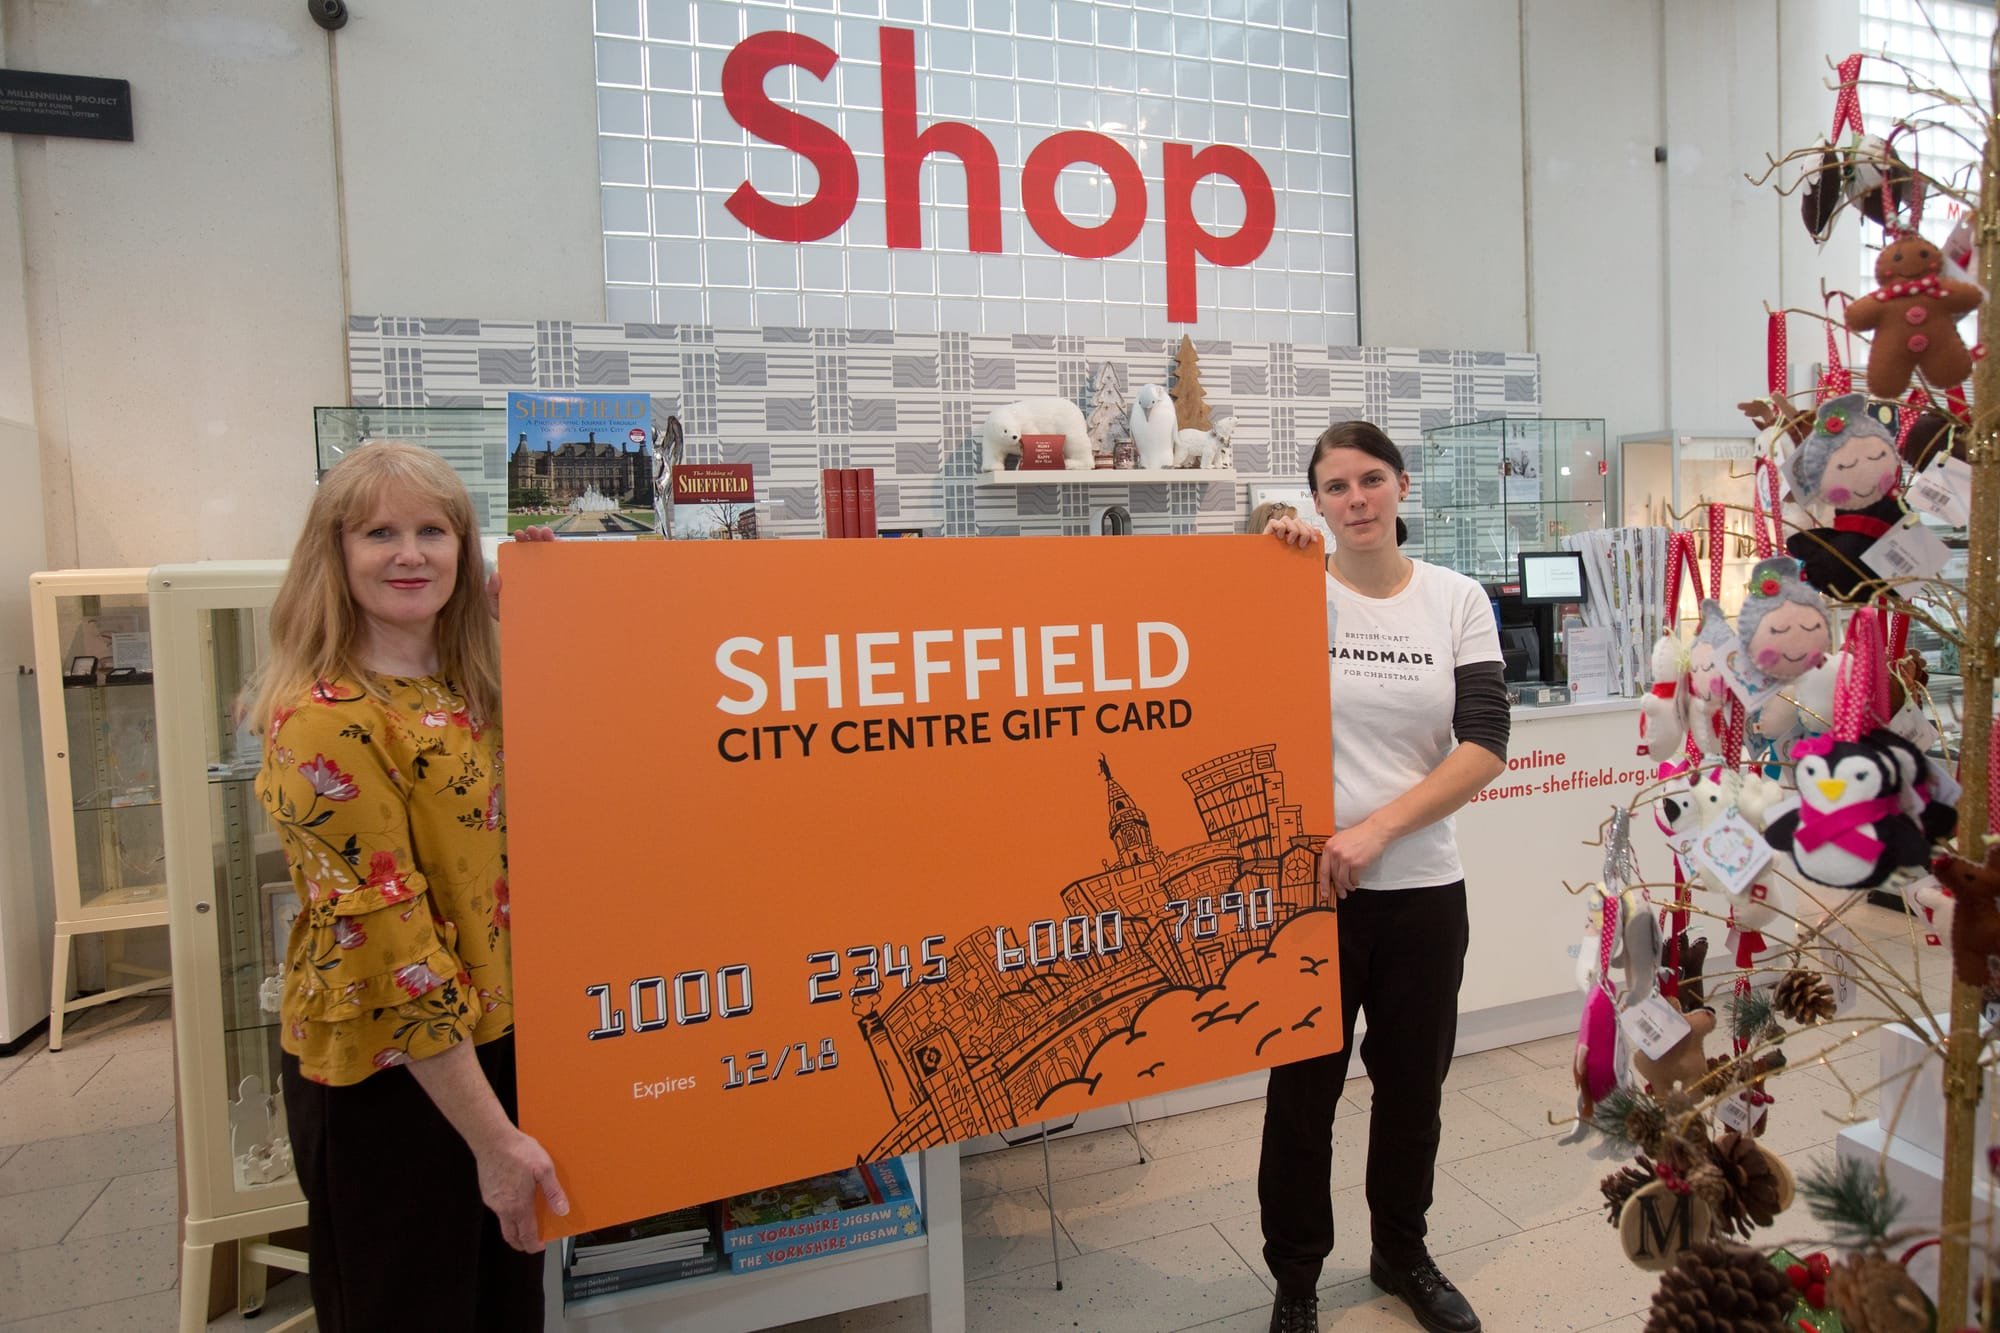 Employers encouraged to reward staff and keep money local with the Sheffield Gift Card